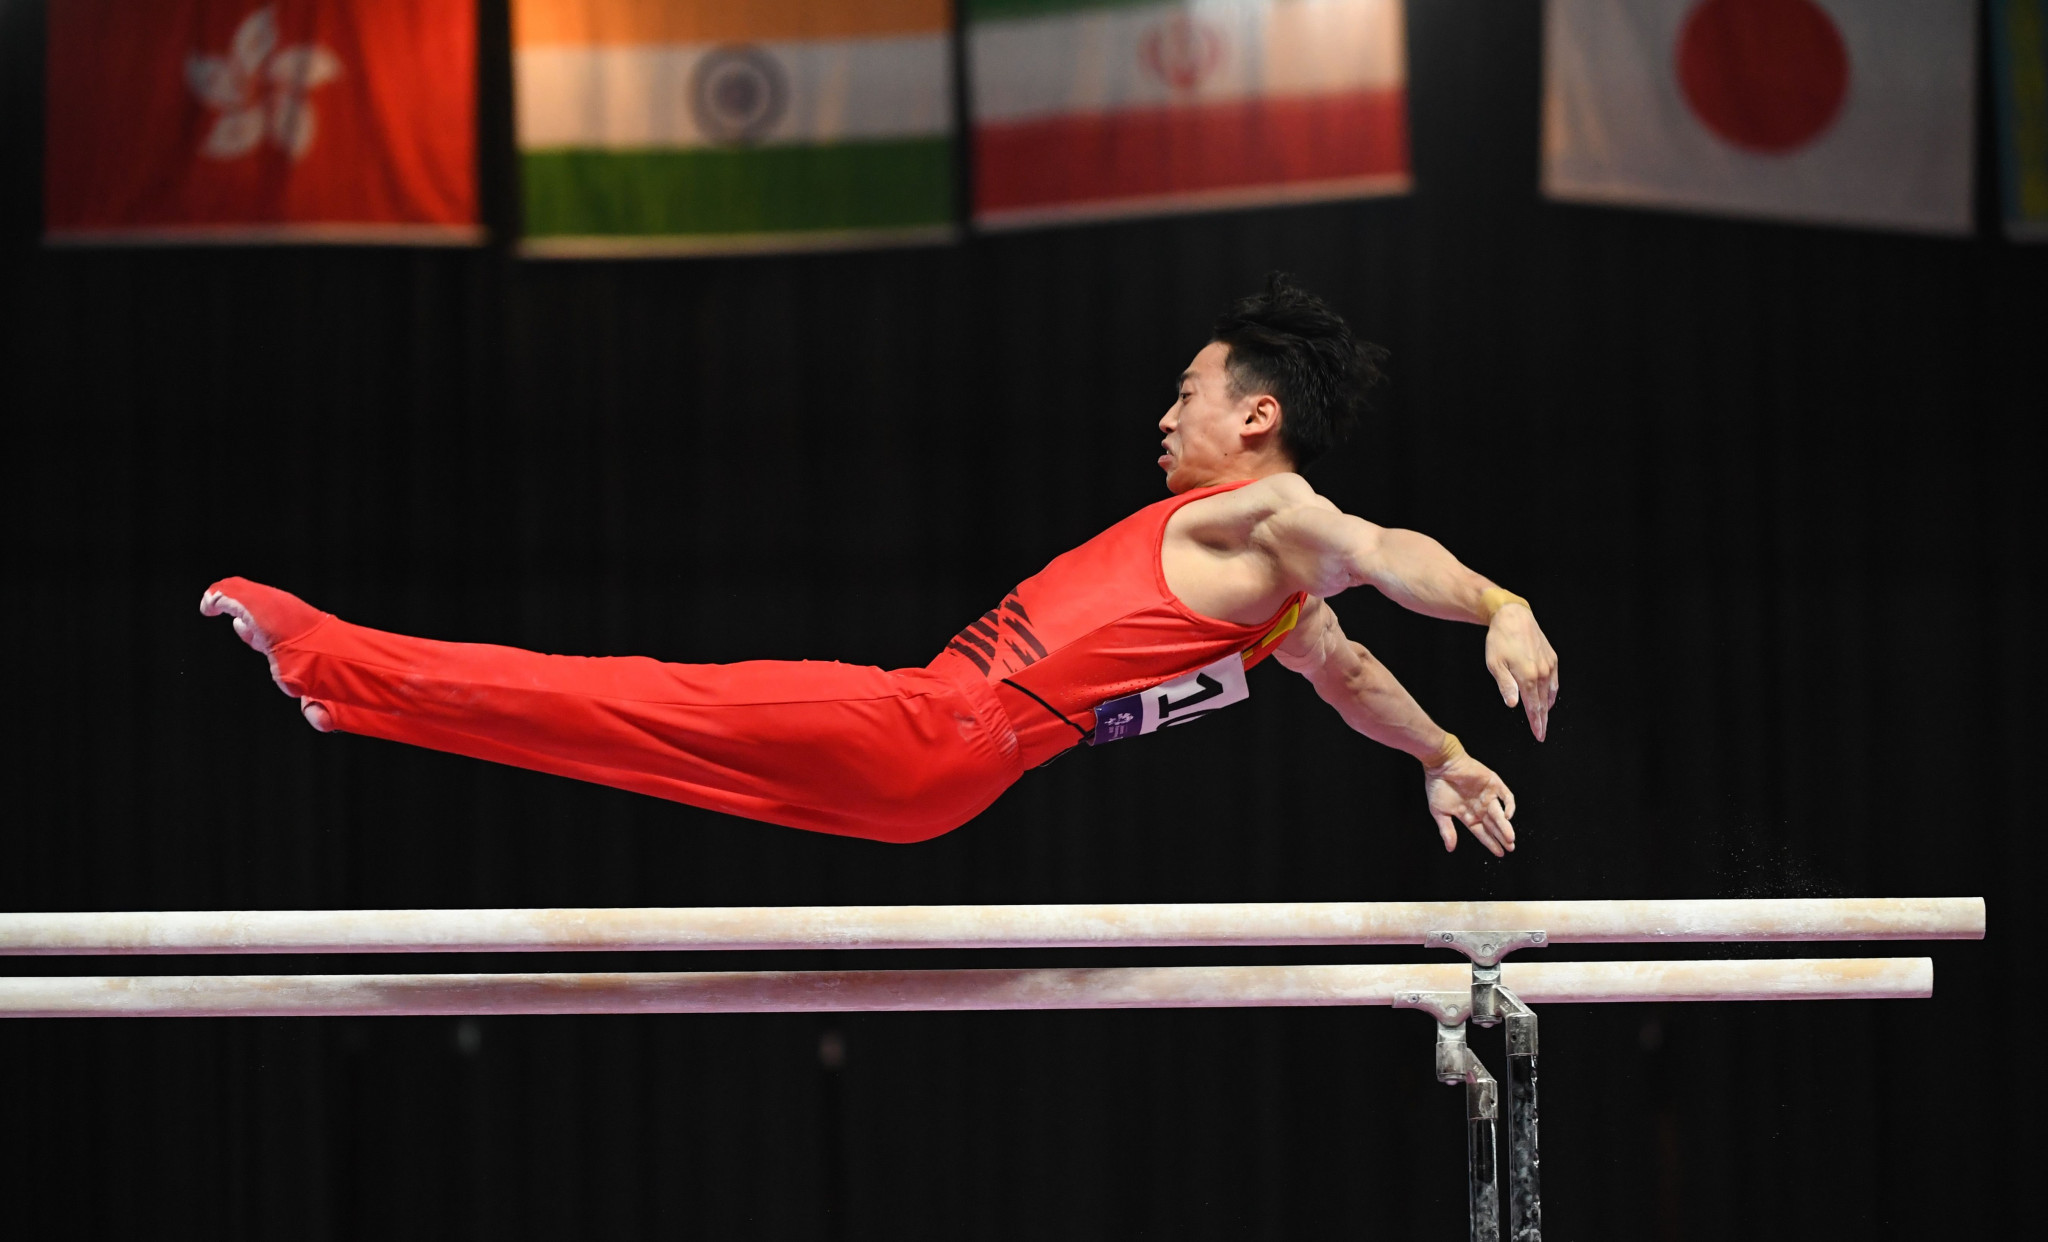 Zou Jingyuan of China produced a near-perfect routine to claim parallel bars gold ©Getty Images